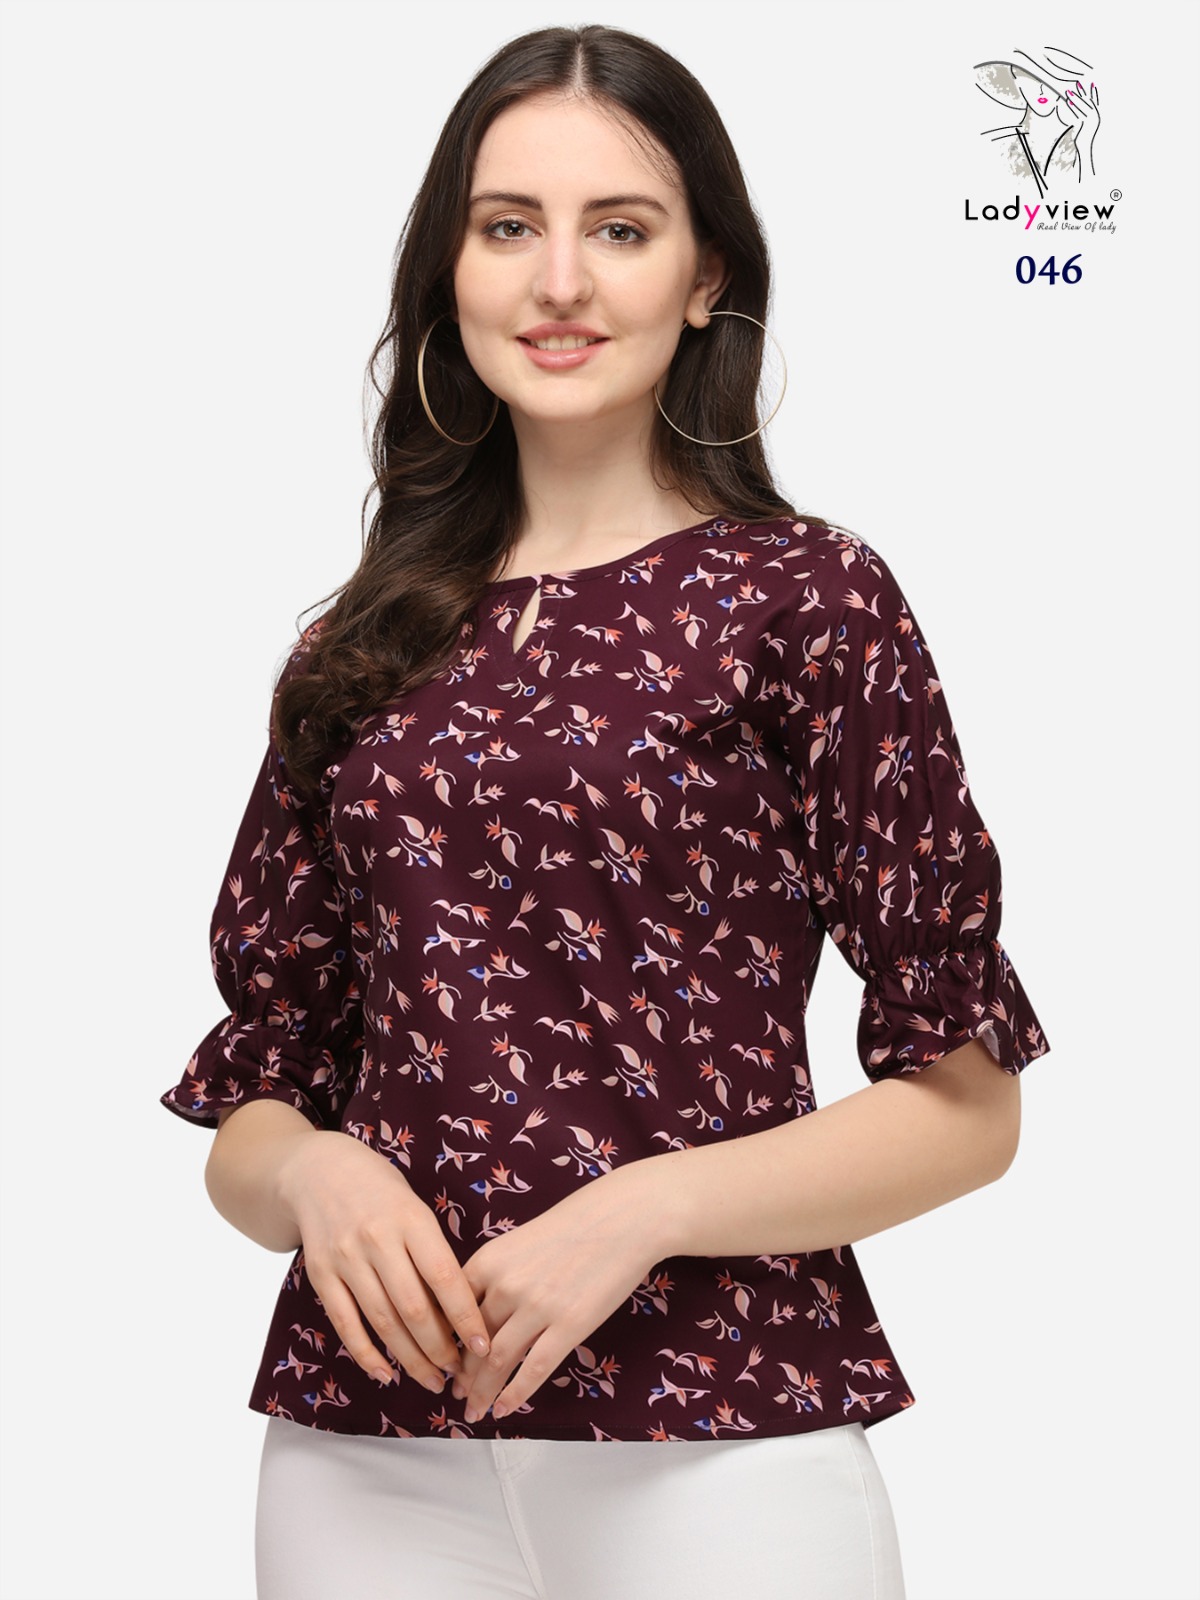 ladyview topsy remix 3 American Crape new and modern style tops catalog